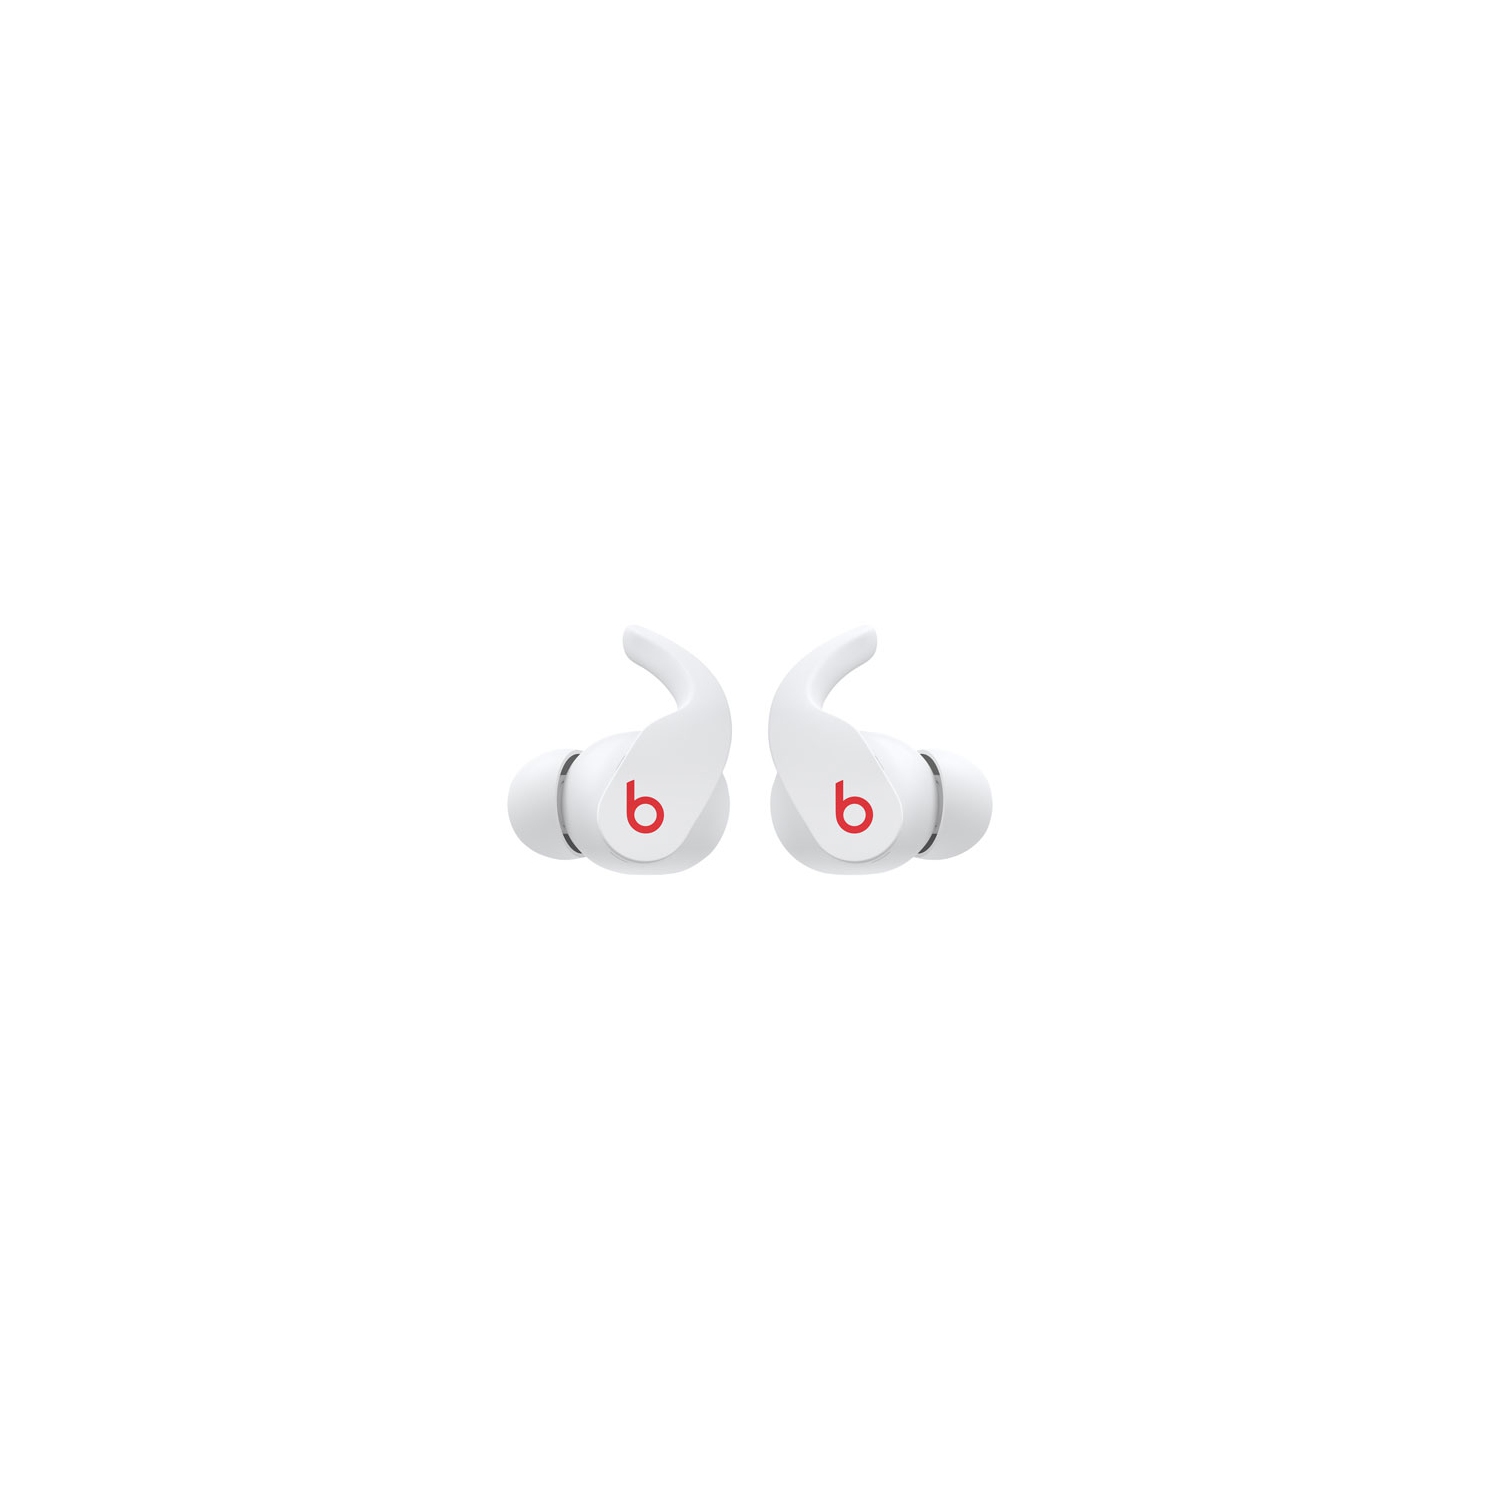 Refurbished (Excellent) - Beats By Dr. Dre Fit Pro In-Ear Noise Cancelling True Wireless Earbuds - White